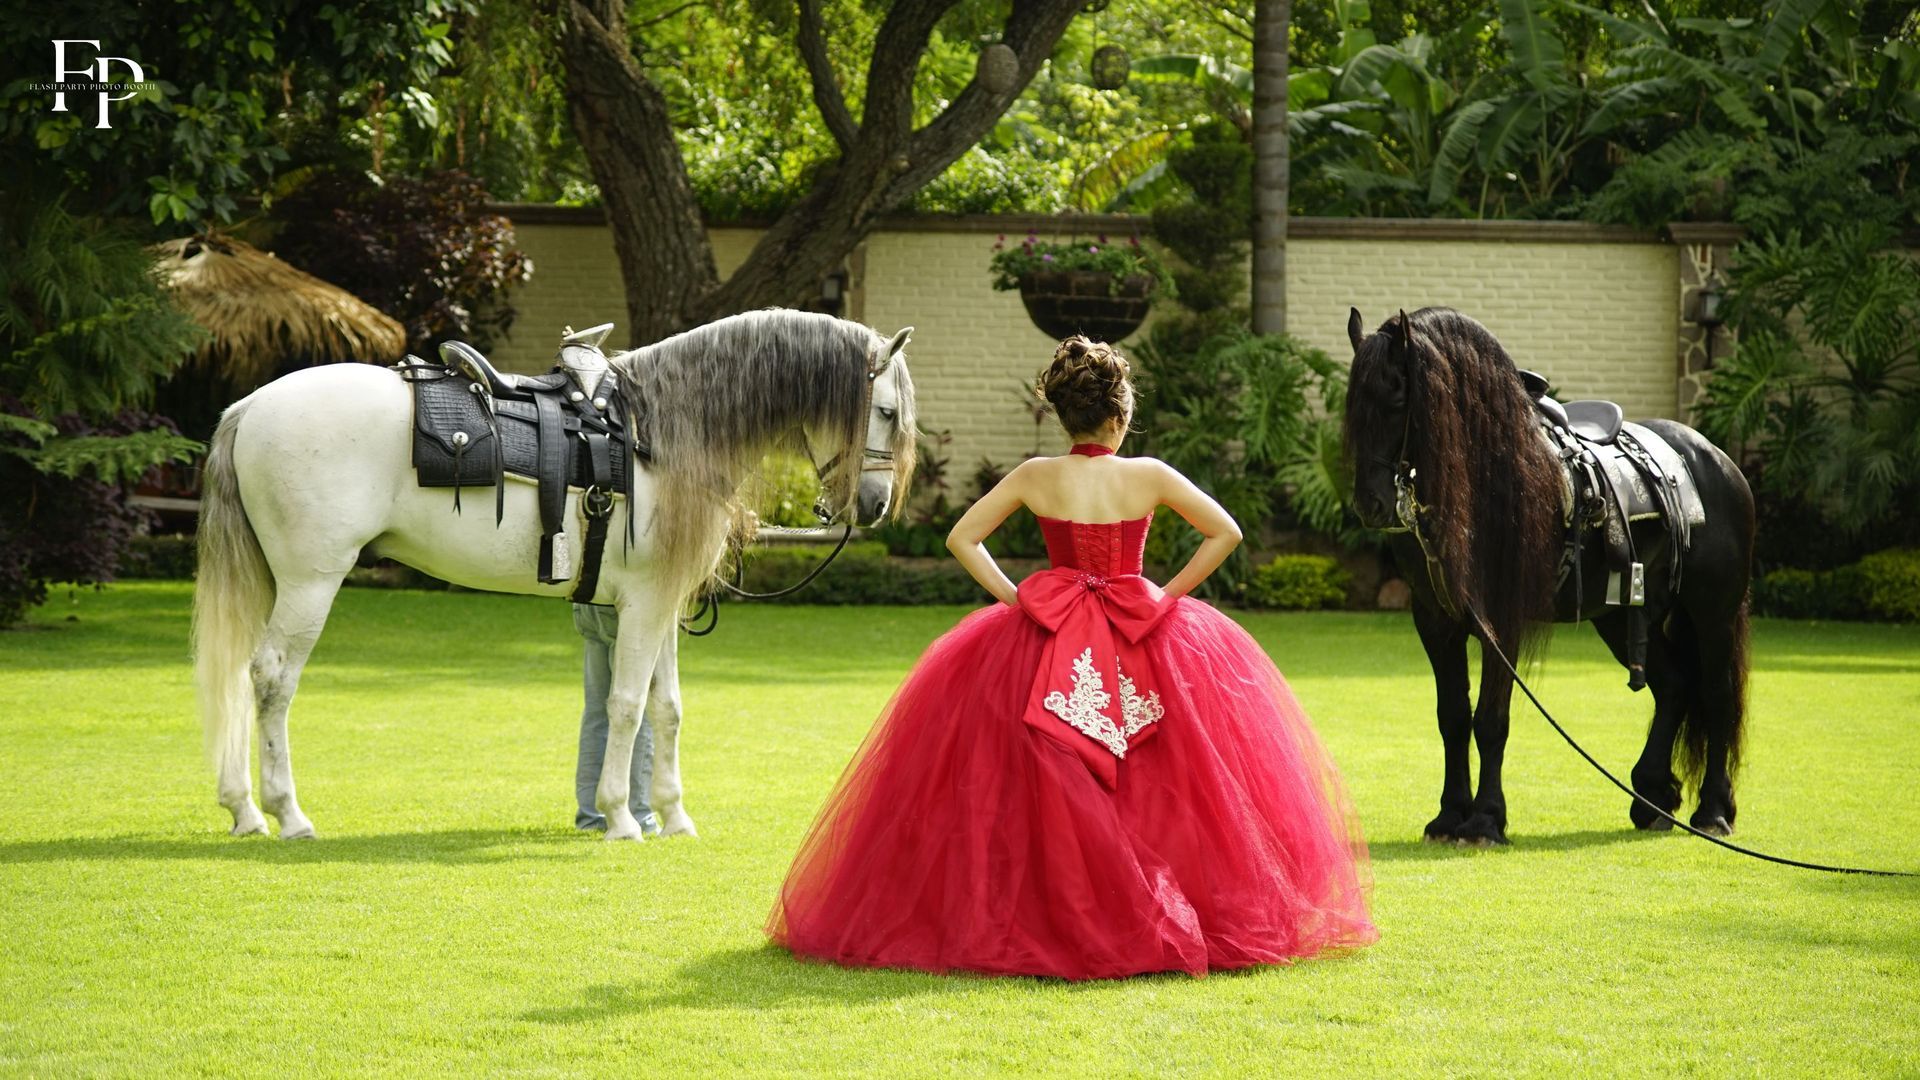 The Quinceañera in Waco is captured with two majestic horses in the backdrop.